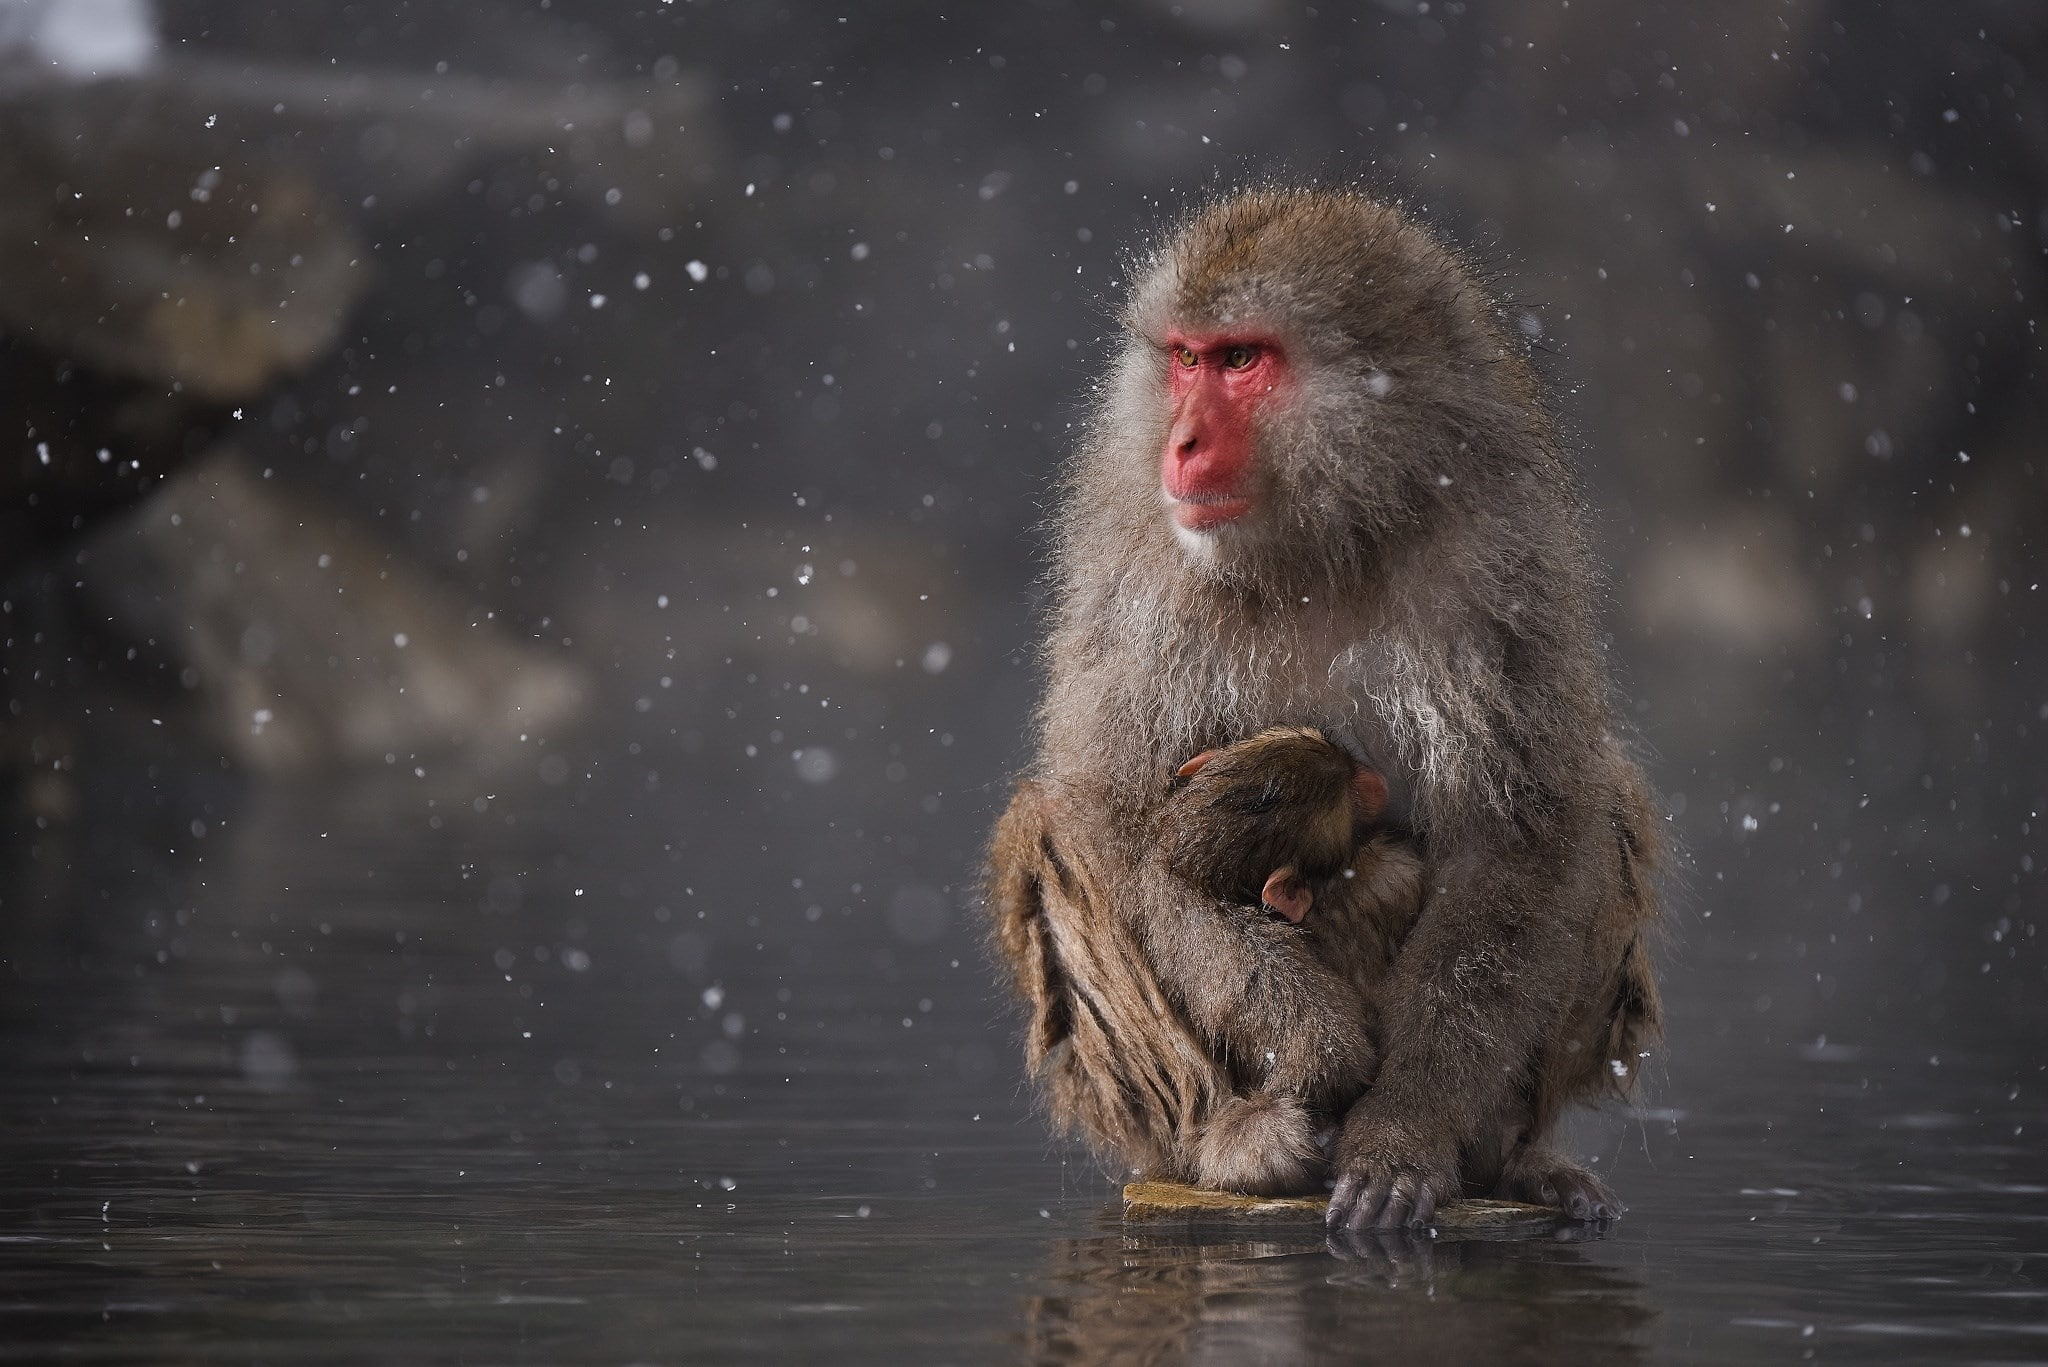 japanese macaque, animals in the wild, animal themes, animal wildlife